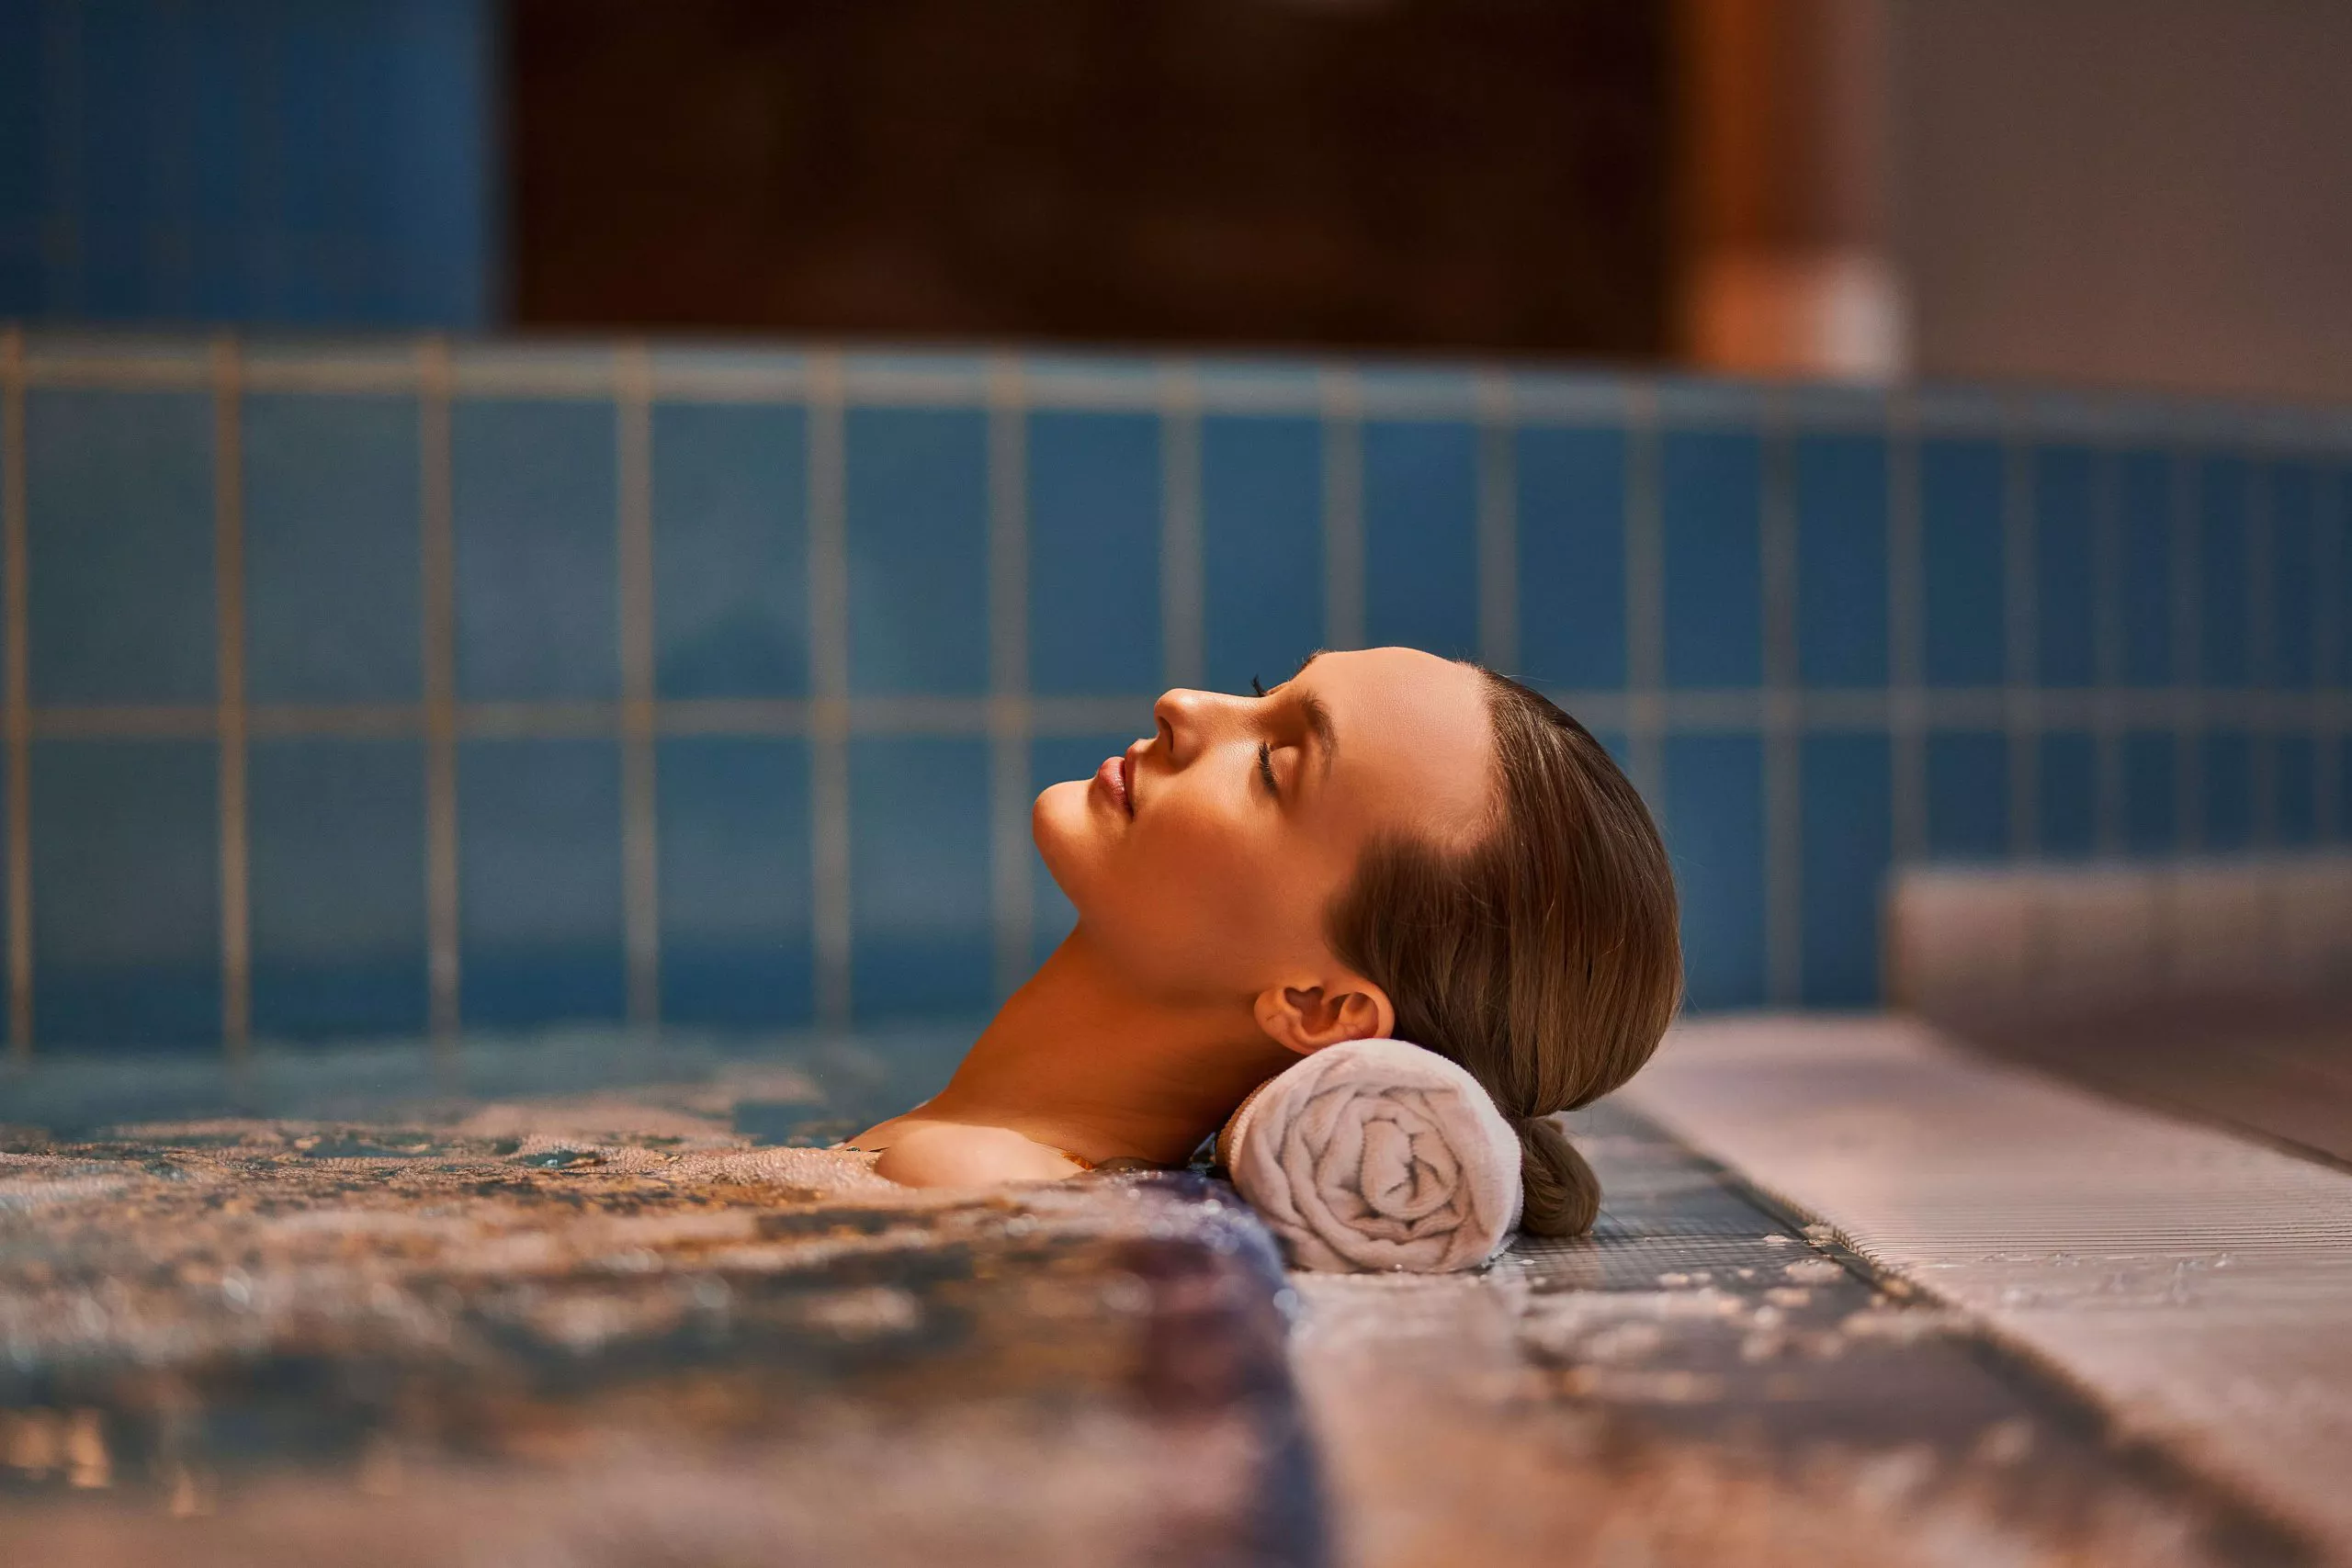 A profile view of a woman lying in a pool of water, her eyes closed and her head is gently resting on a rolled white towel. The look of bliss on her face may come from the warmth of the water, in which she is submerged up to the shoulder bone. The blurred blue tiles behind her and a doorway suggest that the photo was taken indoors.